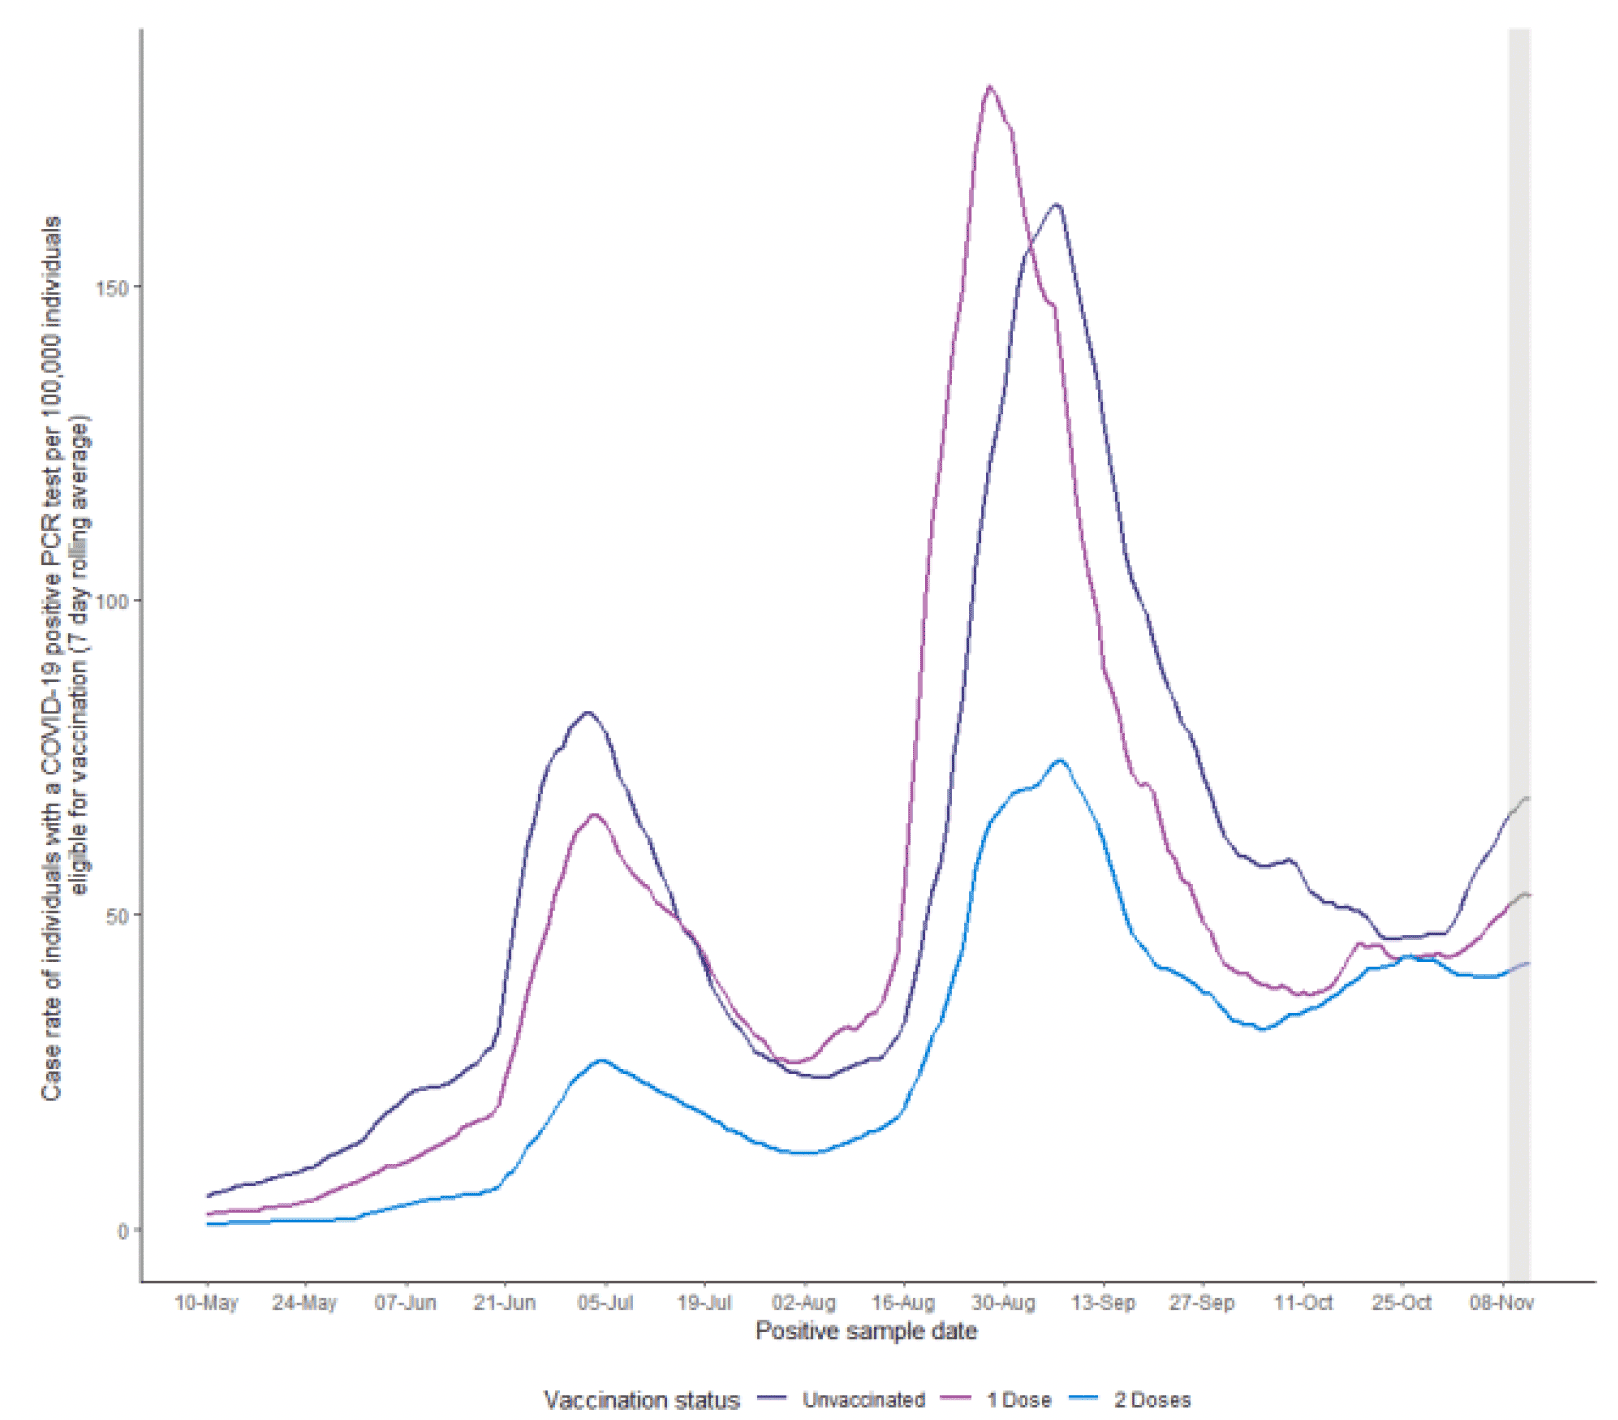 The chart shows that the COVID-19 case numbers for unvaccinated, 1 Dose and 2 Dose individuals were at a very low level of under 10 per 100,000 on the 10 May. All showed an increase with a peak in early July, before dipping back down at the beginning of August and then increasing to a greater level than before in late August/early September. Unvaccinated and 1 dose cases per 100,000 are higher than 2 dose cases per 100,000  throughout. Unvaccinated peak at around 90 positive PCR tests per 100,000 in July and 180 per 100,000 in early September. 2 dose peak at around 25 per 100,000 in July and 70 per 100,000 in September. 1 dose peak at around 65 per 100,000 in July and 180 per 100,000 in September. During September cases decrease in all group to roughly 40 per 100,000 for all groups at the end of October. Unvaccinated and 1 dose have risen slightly since then while 2 doses has remained relatively flat.